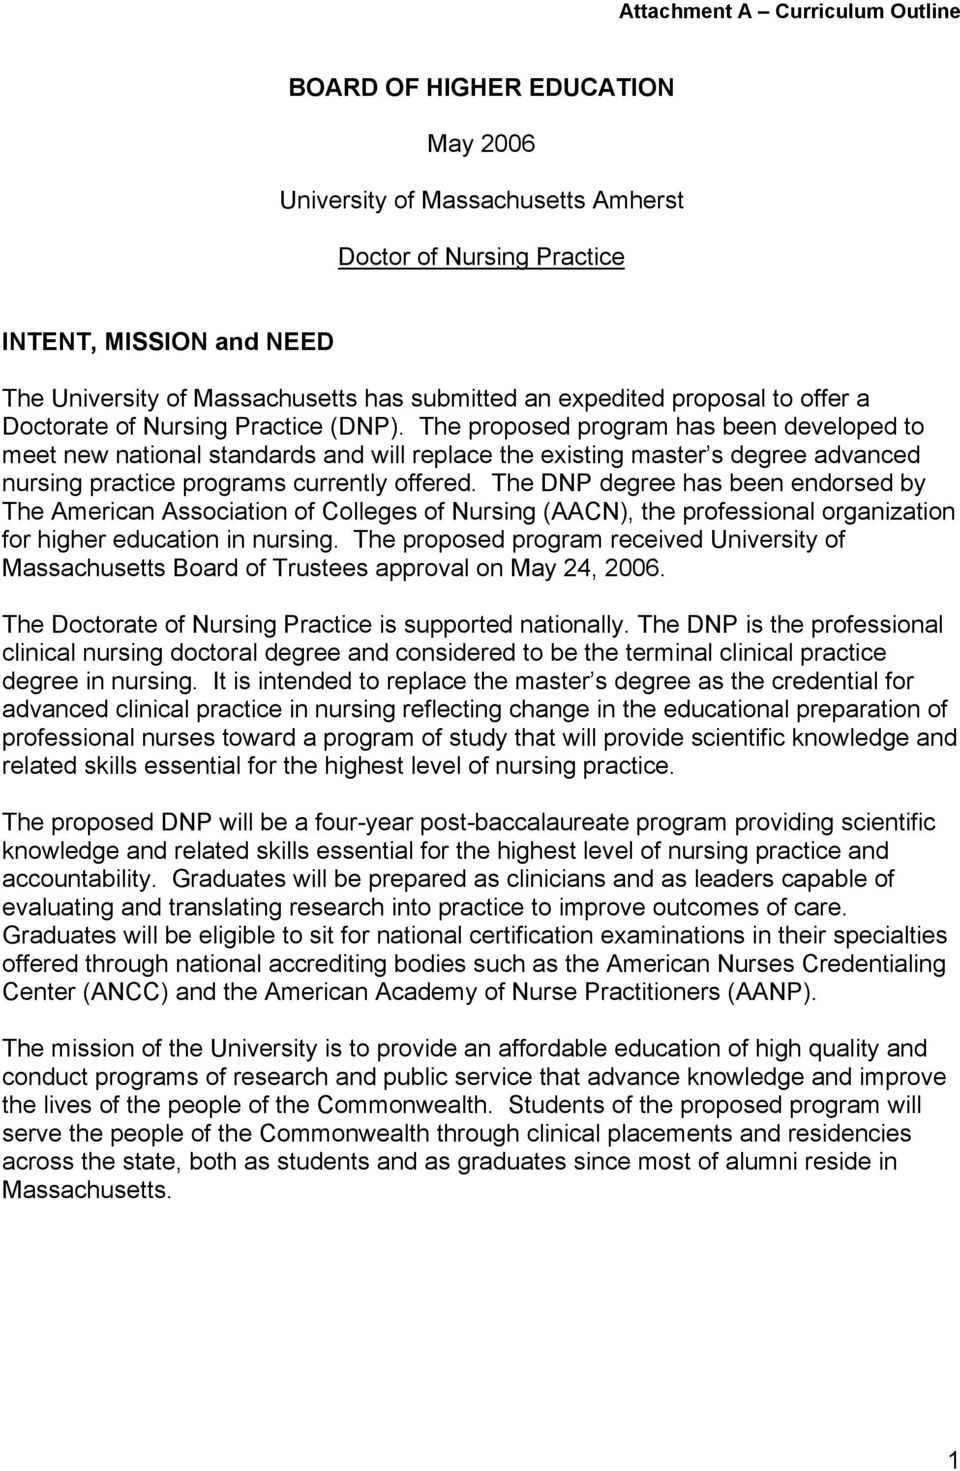 The proposed program has been developed to meet new national standards and will replace the existing master s degree advanced nursing practice programs currently offered.